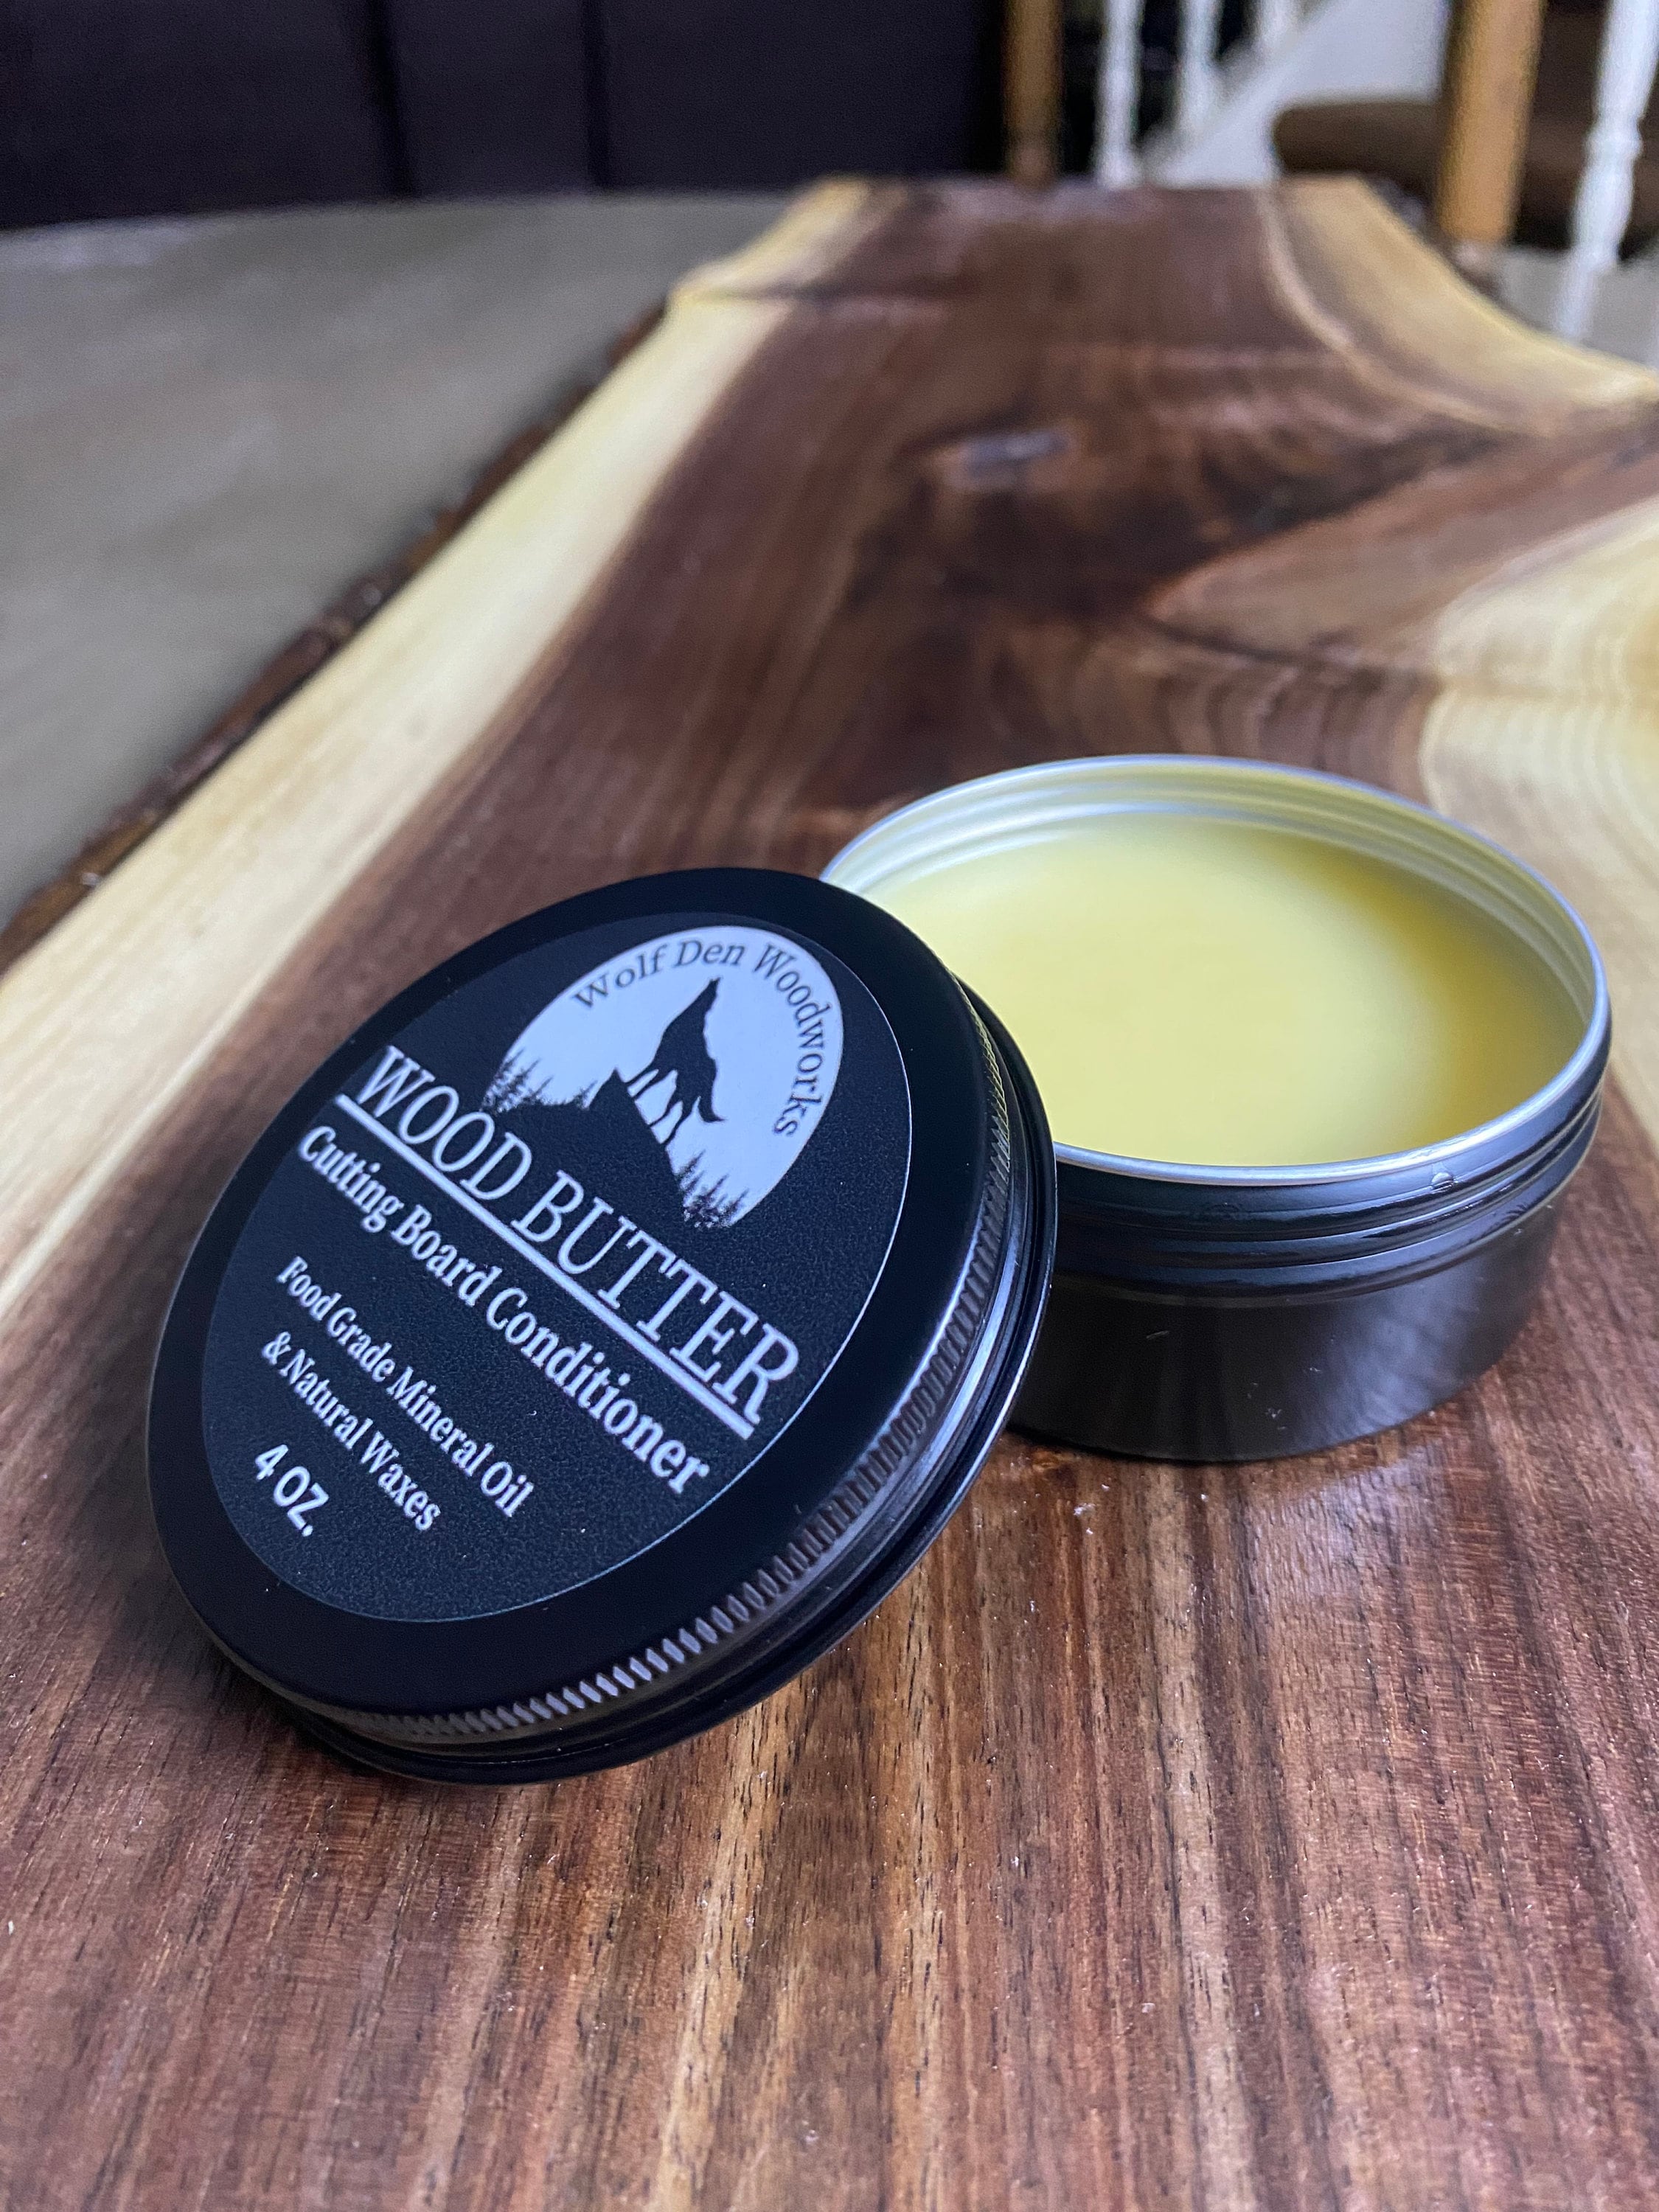 Board and Spoon Wood Wax 2 Oz Organic Beeswax and Mineral Oil Conditioner  and Wood Butter, Made in USA 